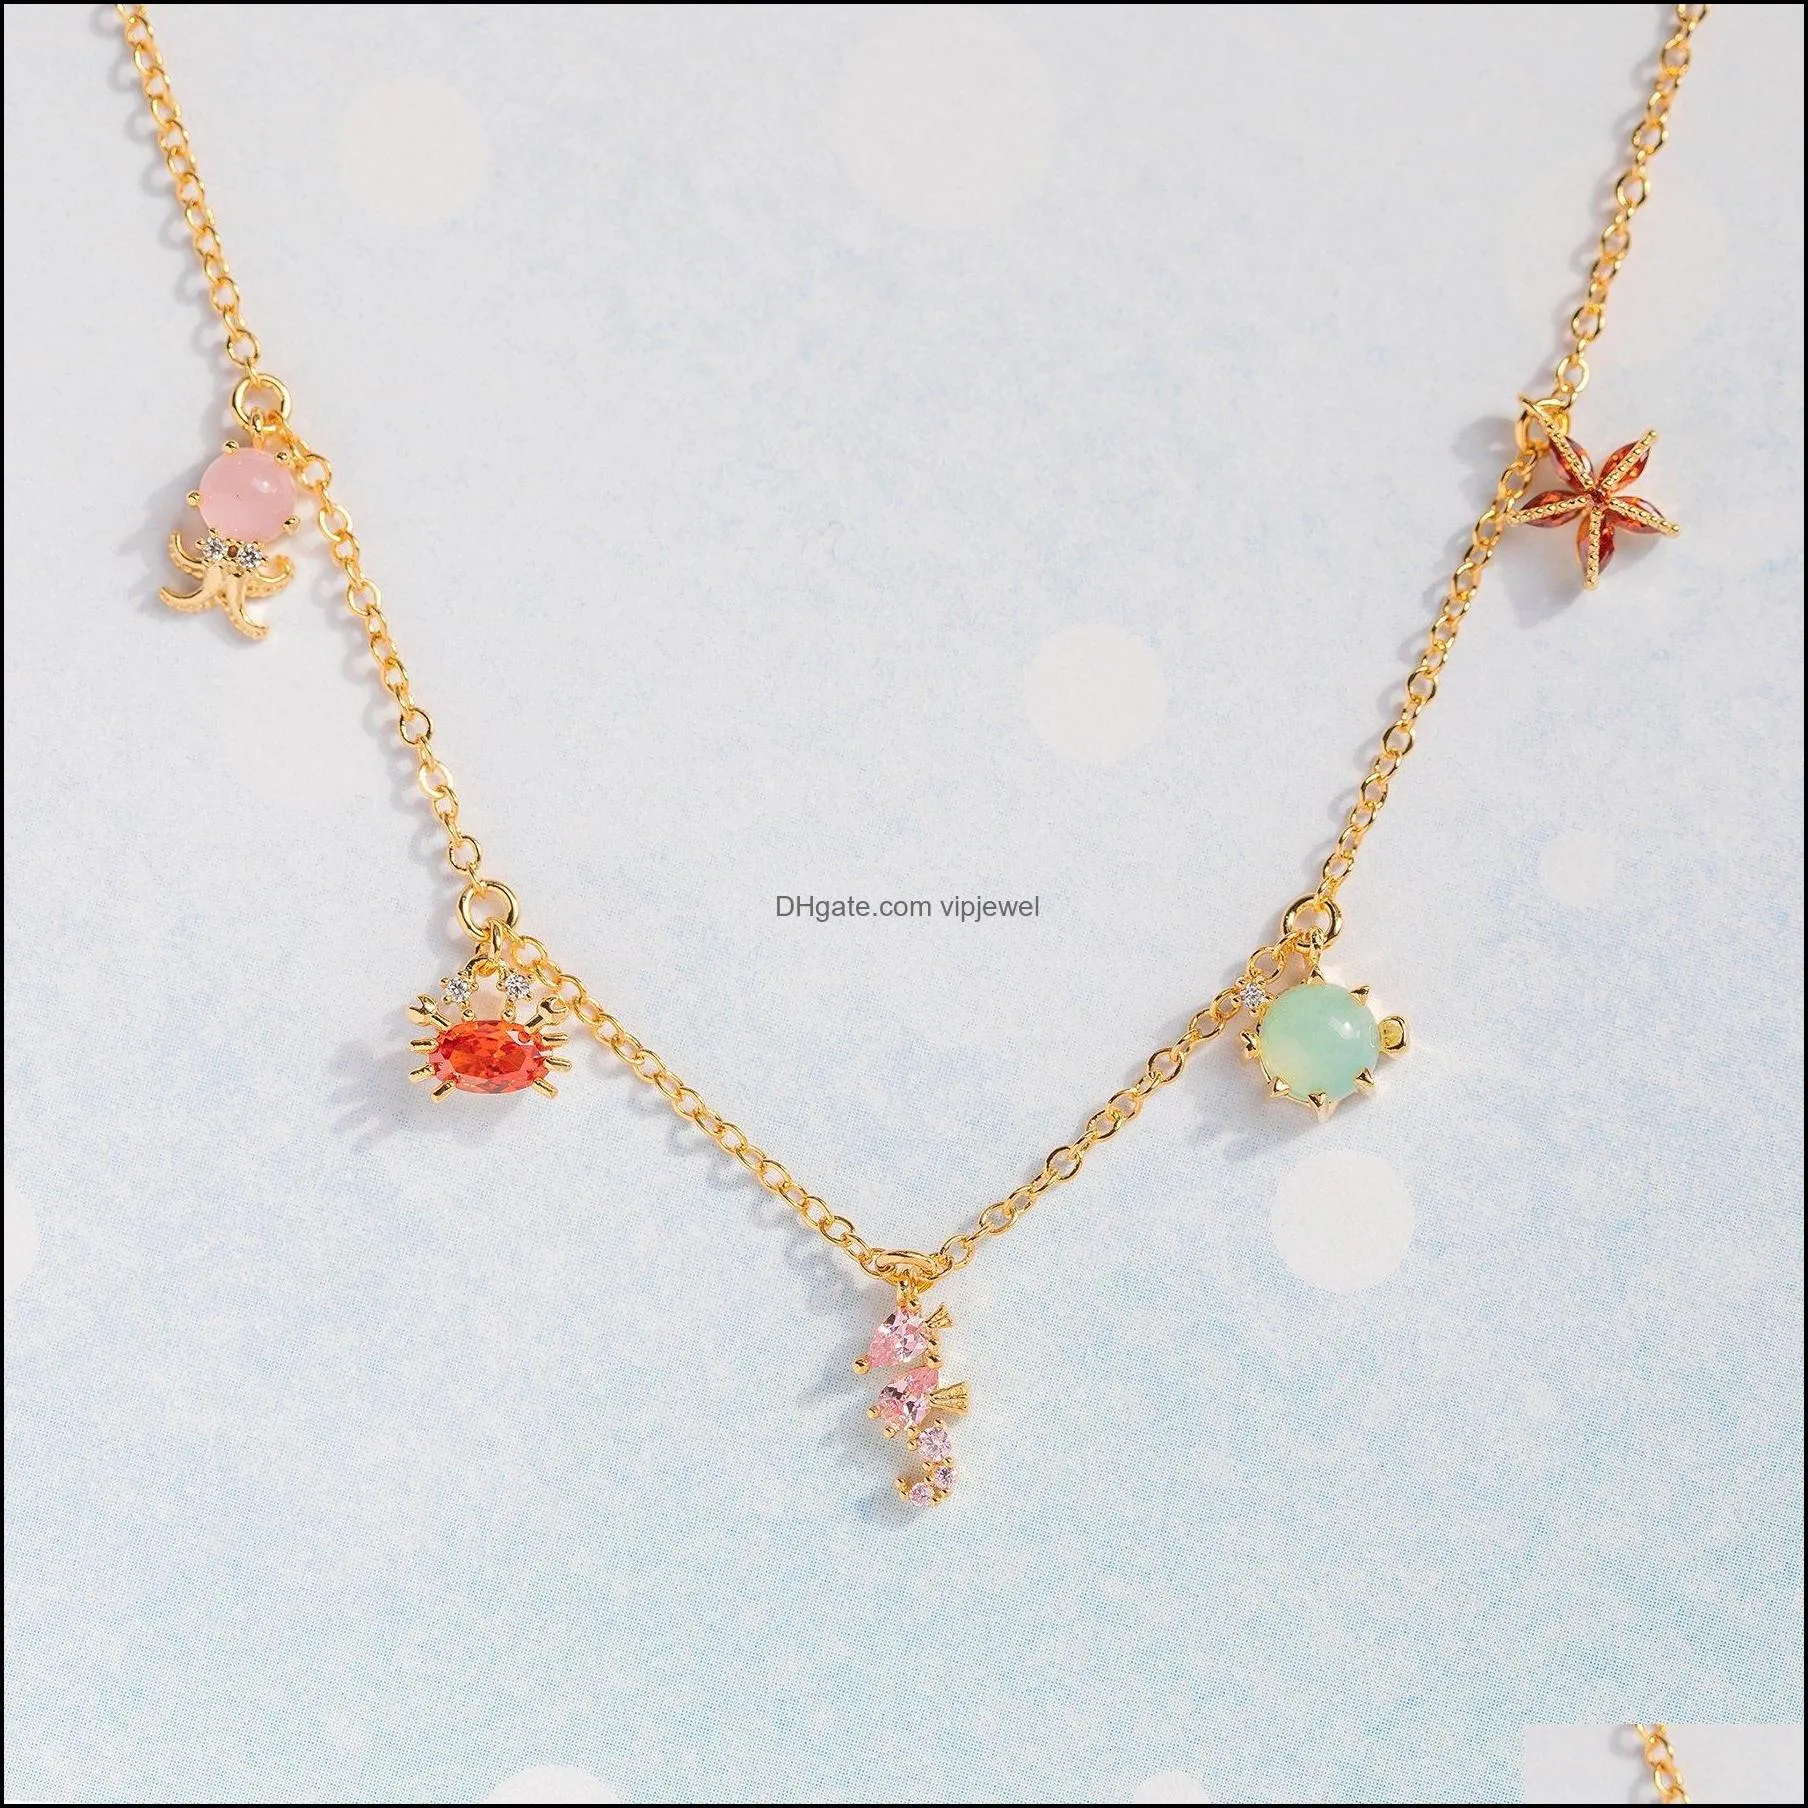 colorful zircon mini ocean animals pendant necklaces small beach charm clavicle summer star necklace jewelry a2z